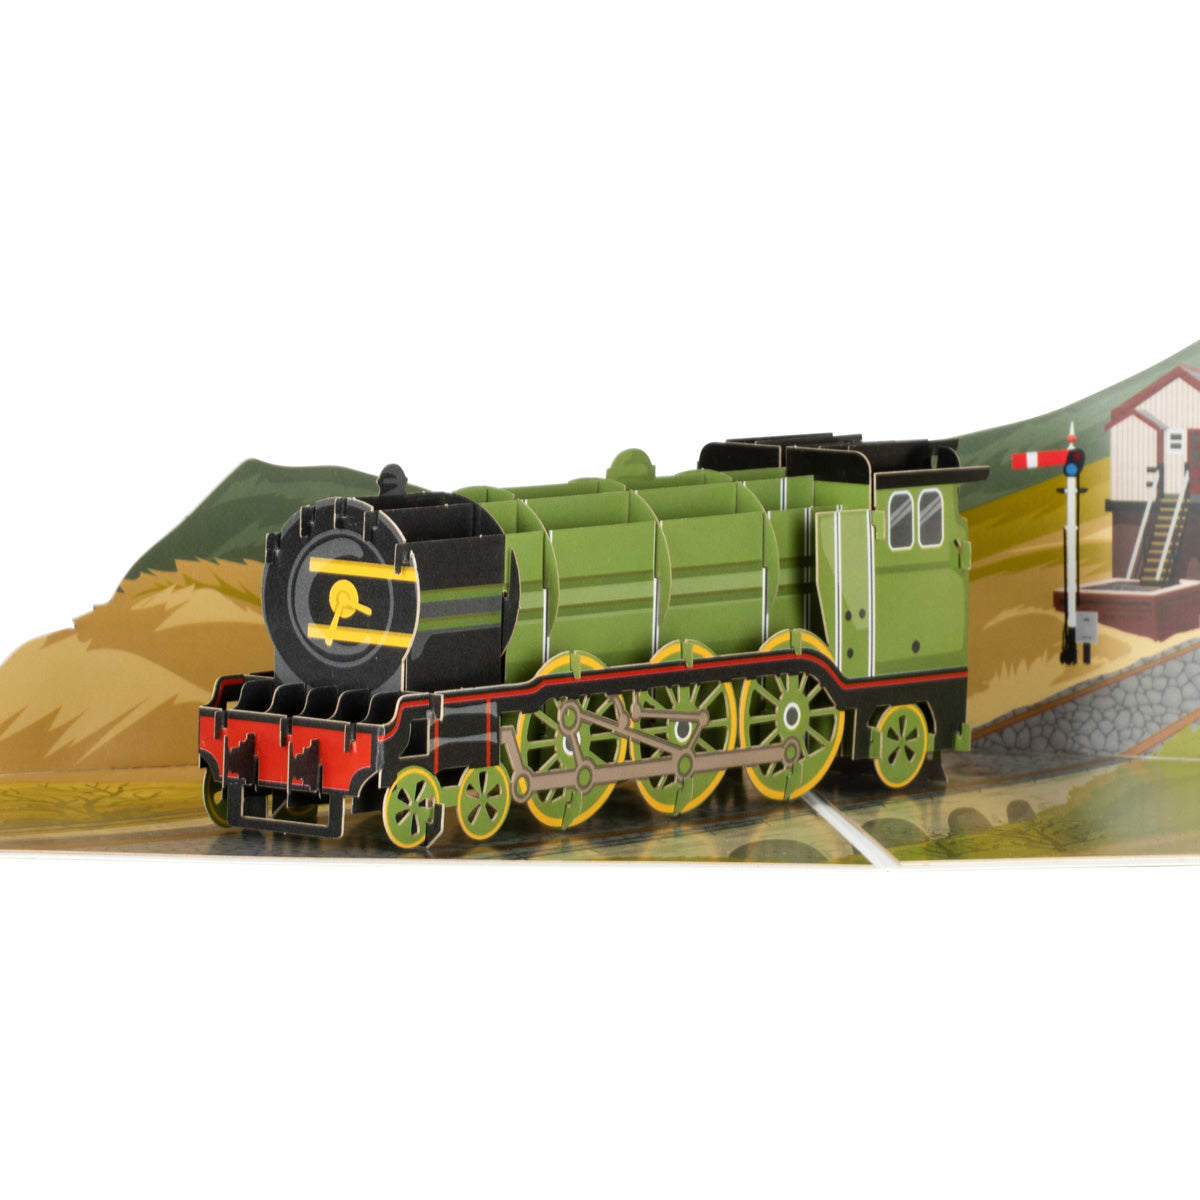 Vintage Steam Train Any Occasion 3D Pop Up Greeting Card